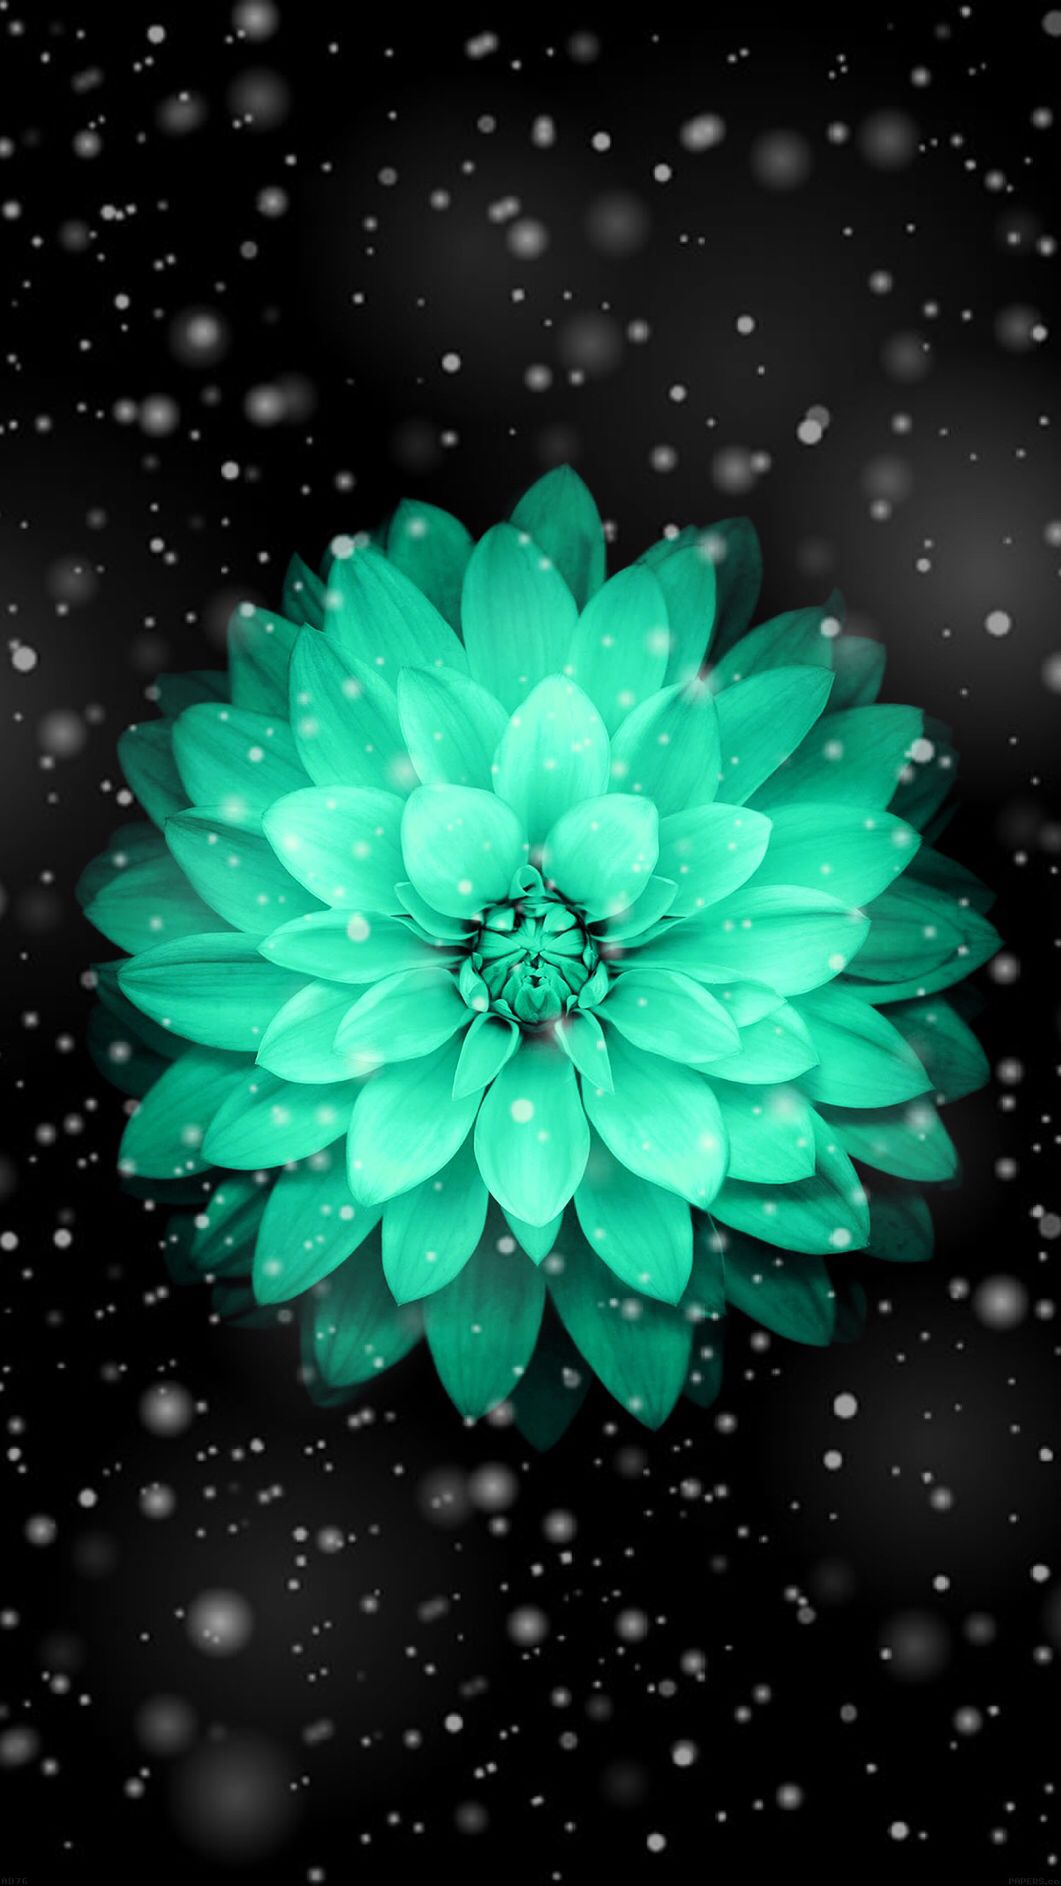 This One Is Pretty Much An Apple Background Because The Flower